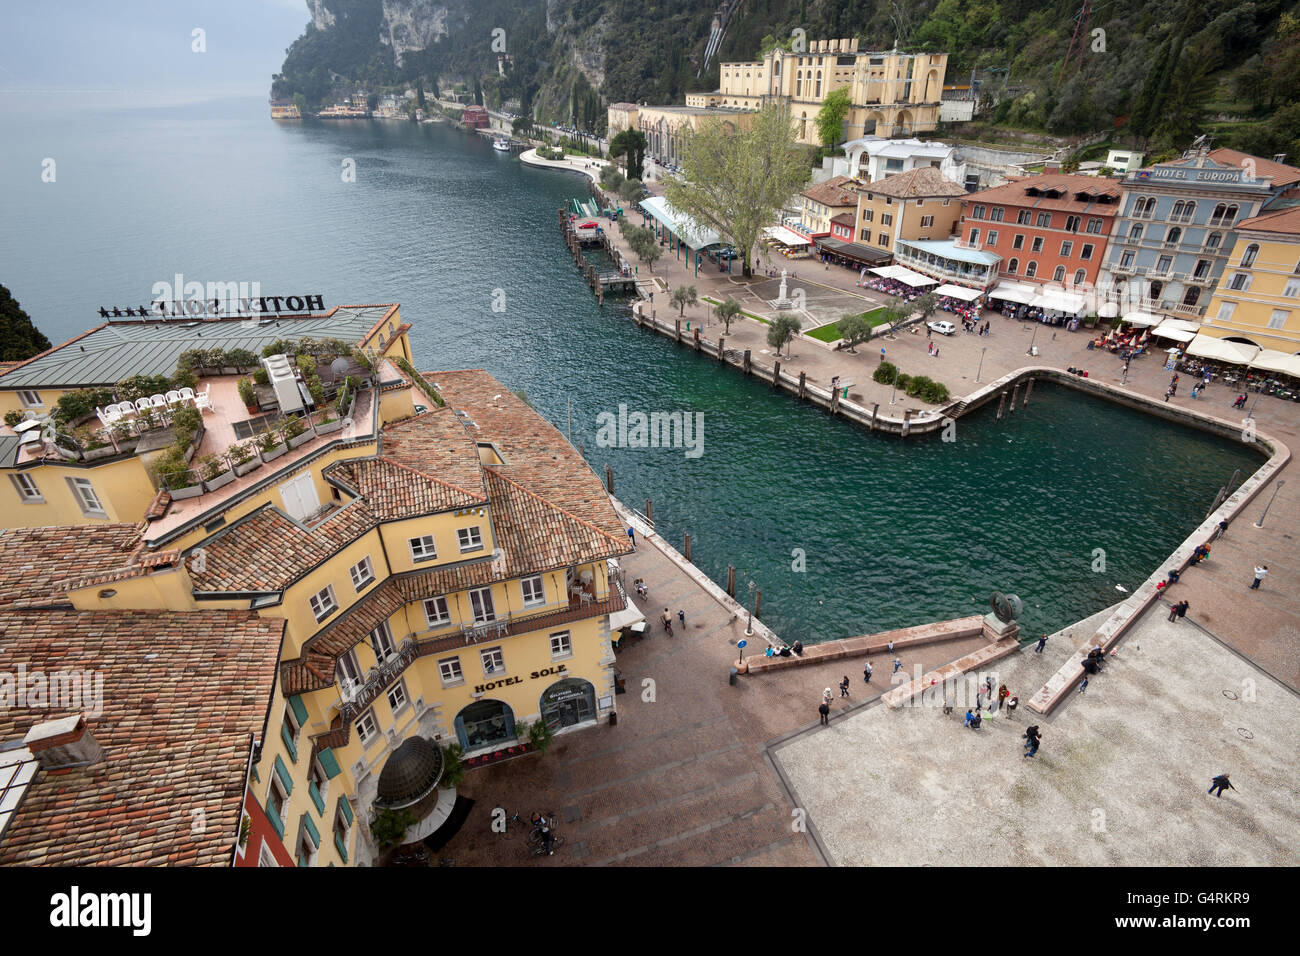 View from the Torre Apponale, clock tower, to the Piazza 3 Novembre and the harbour, Riva del Garda, Trentino-Alto Adige, Italy Stock Photo